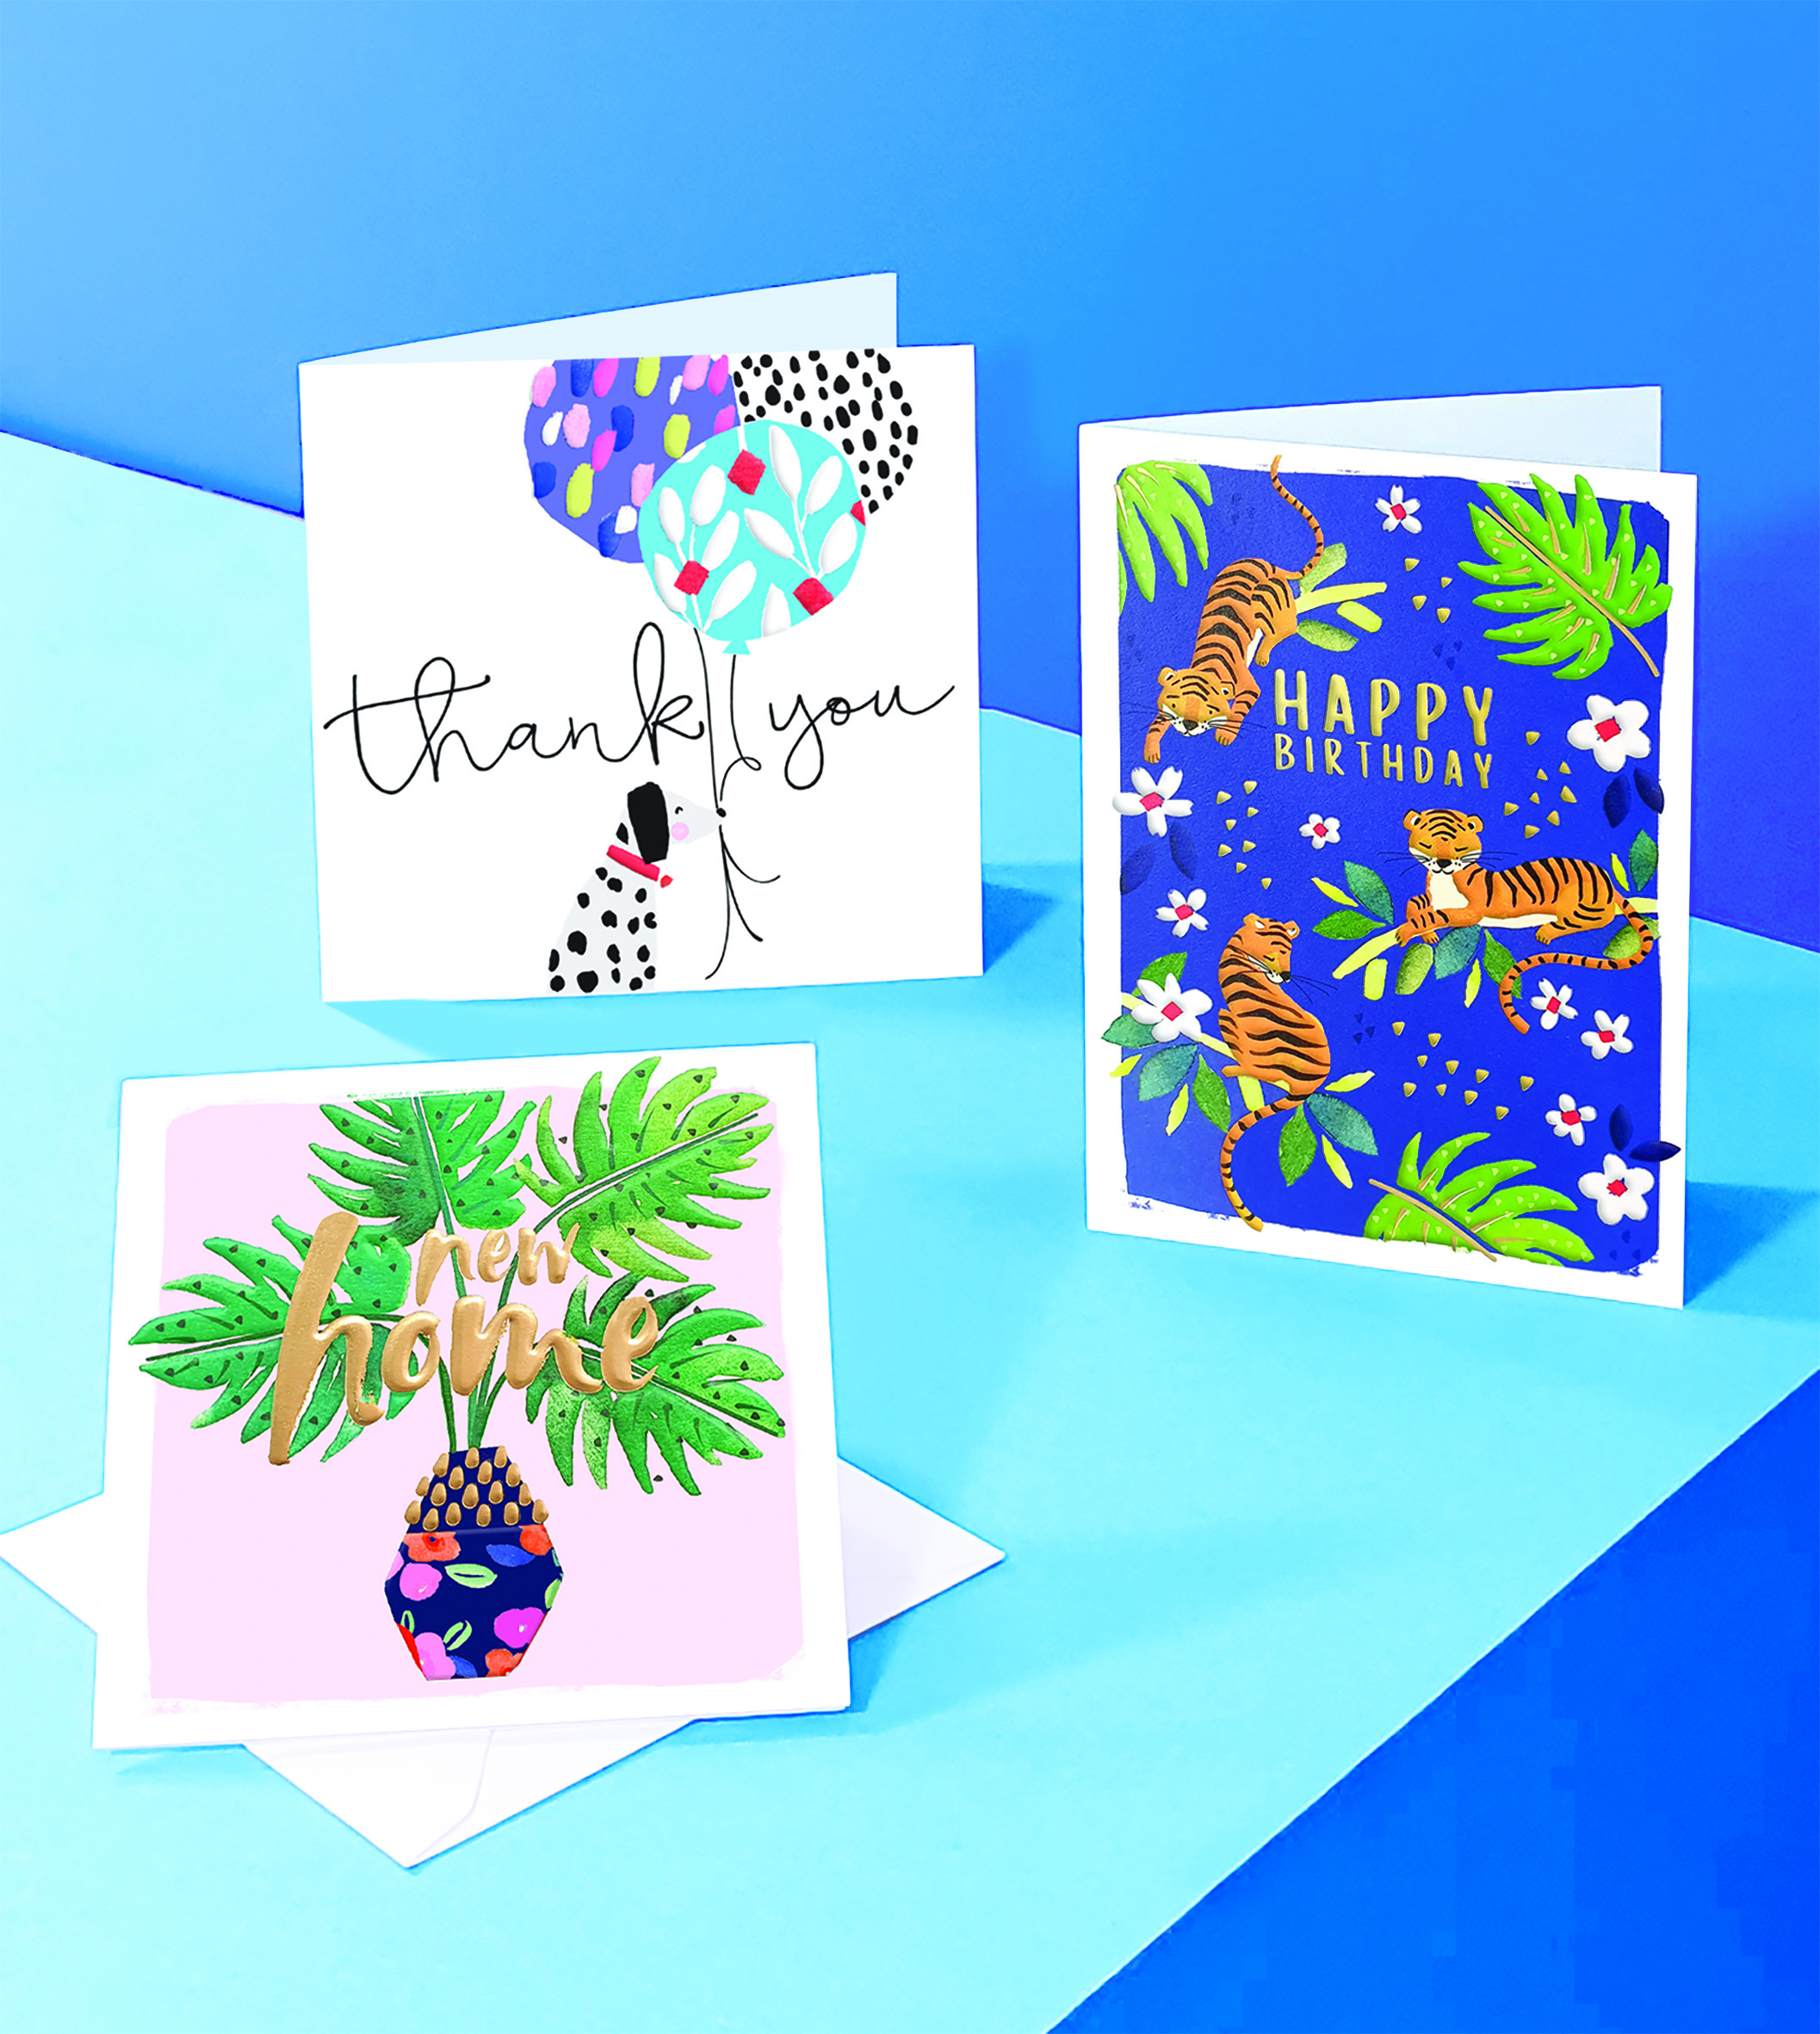 Above: Rosanna Rossi offers a wide selection of relations and occasions cards.